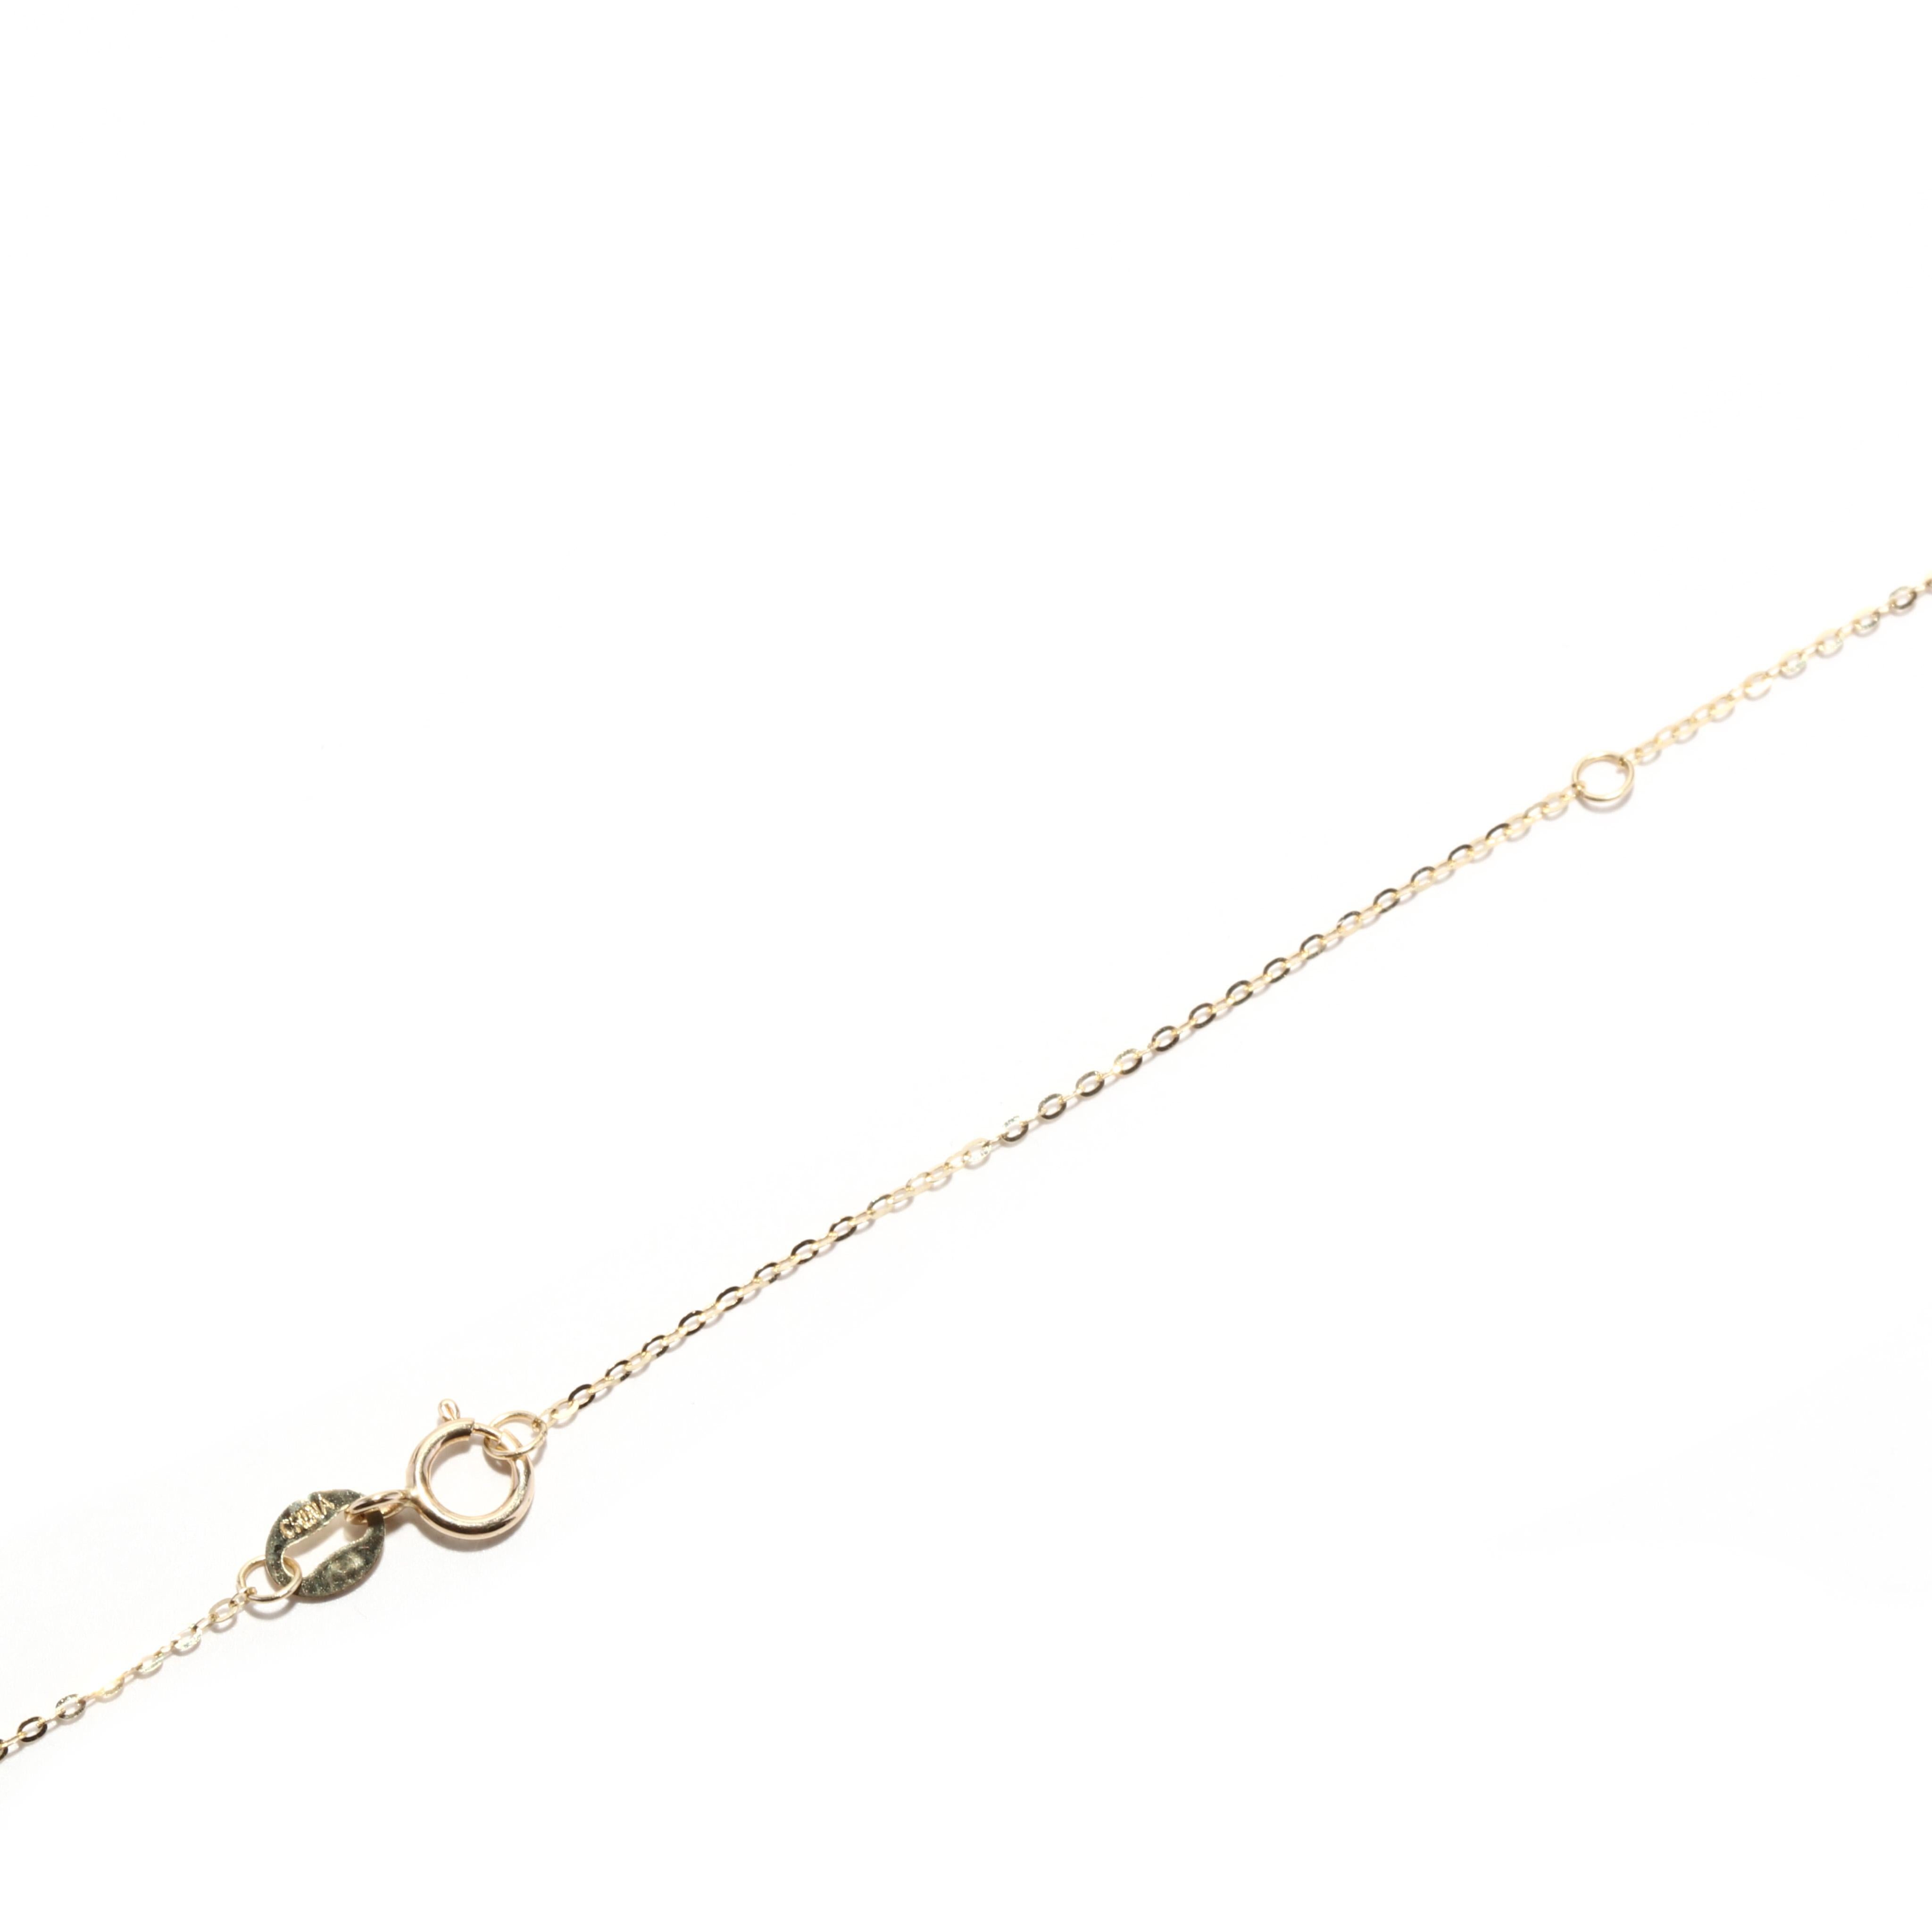 Diamond Initial R Necklace, 14K Yellow Gold, Length 16 Inches, Single Stone 1